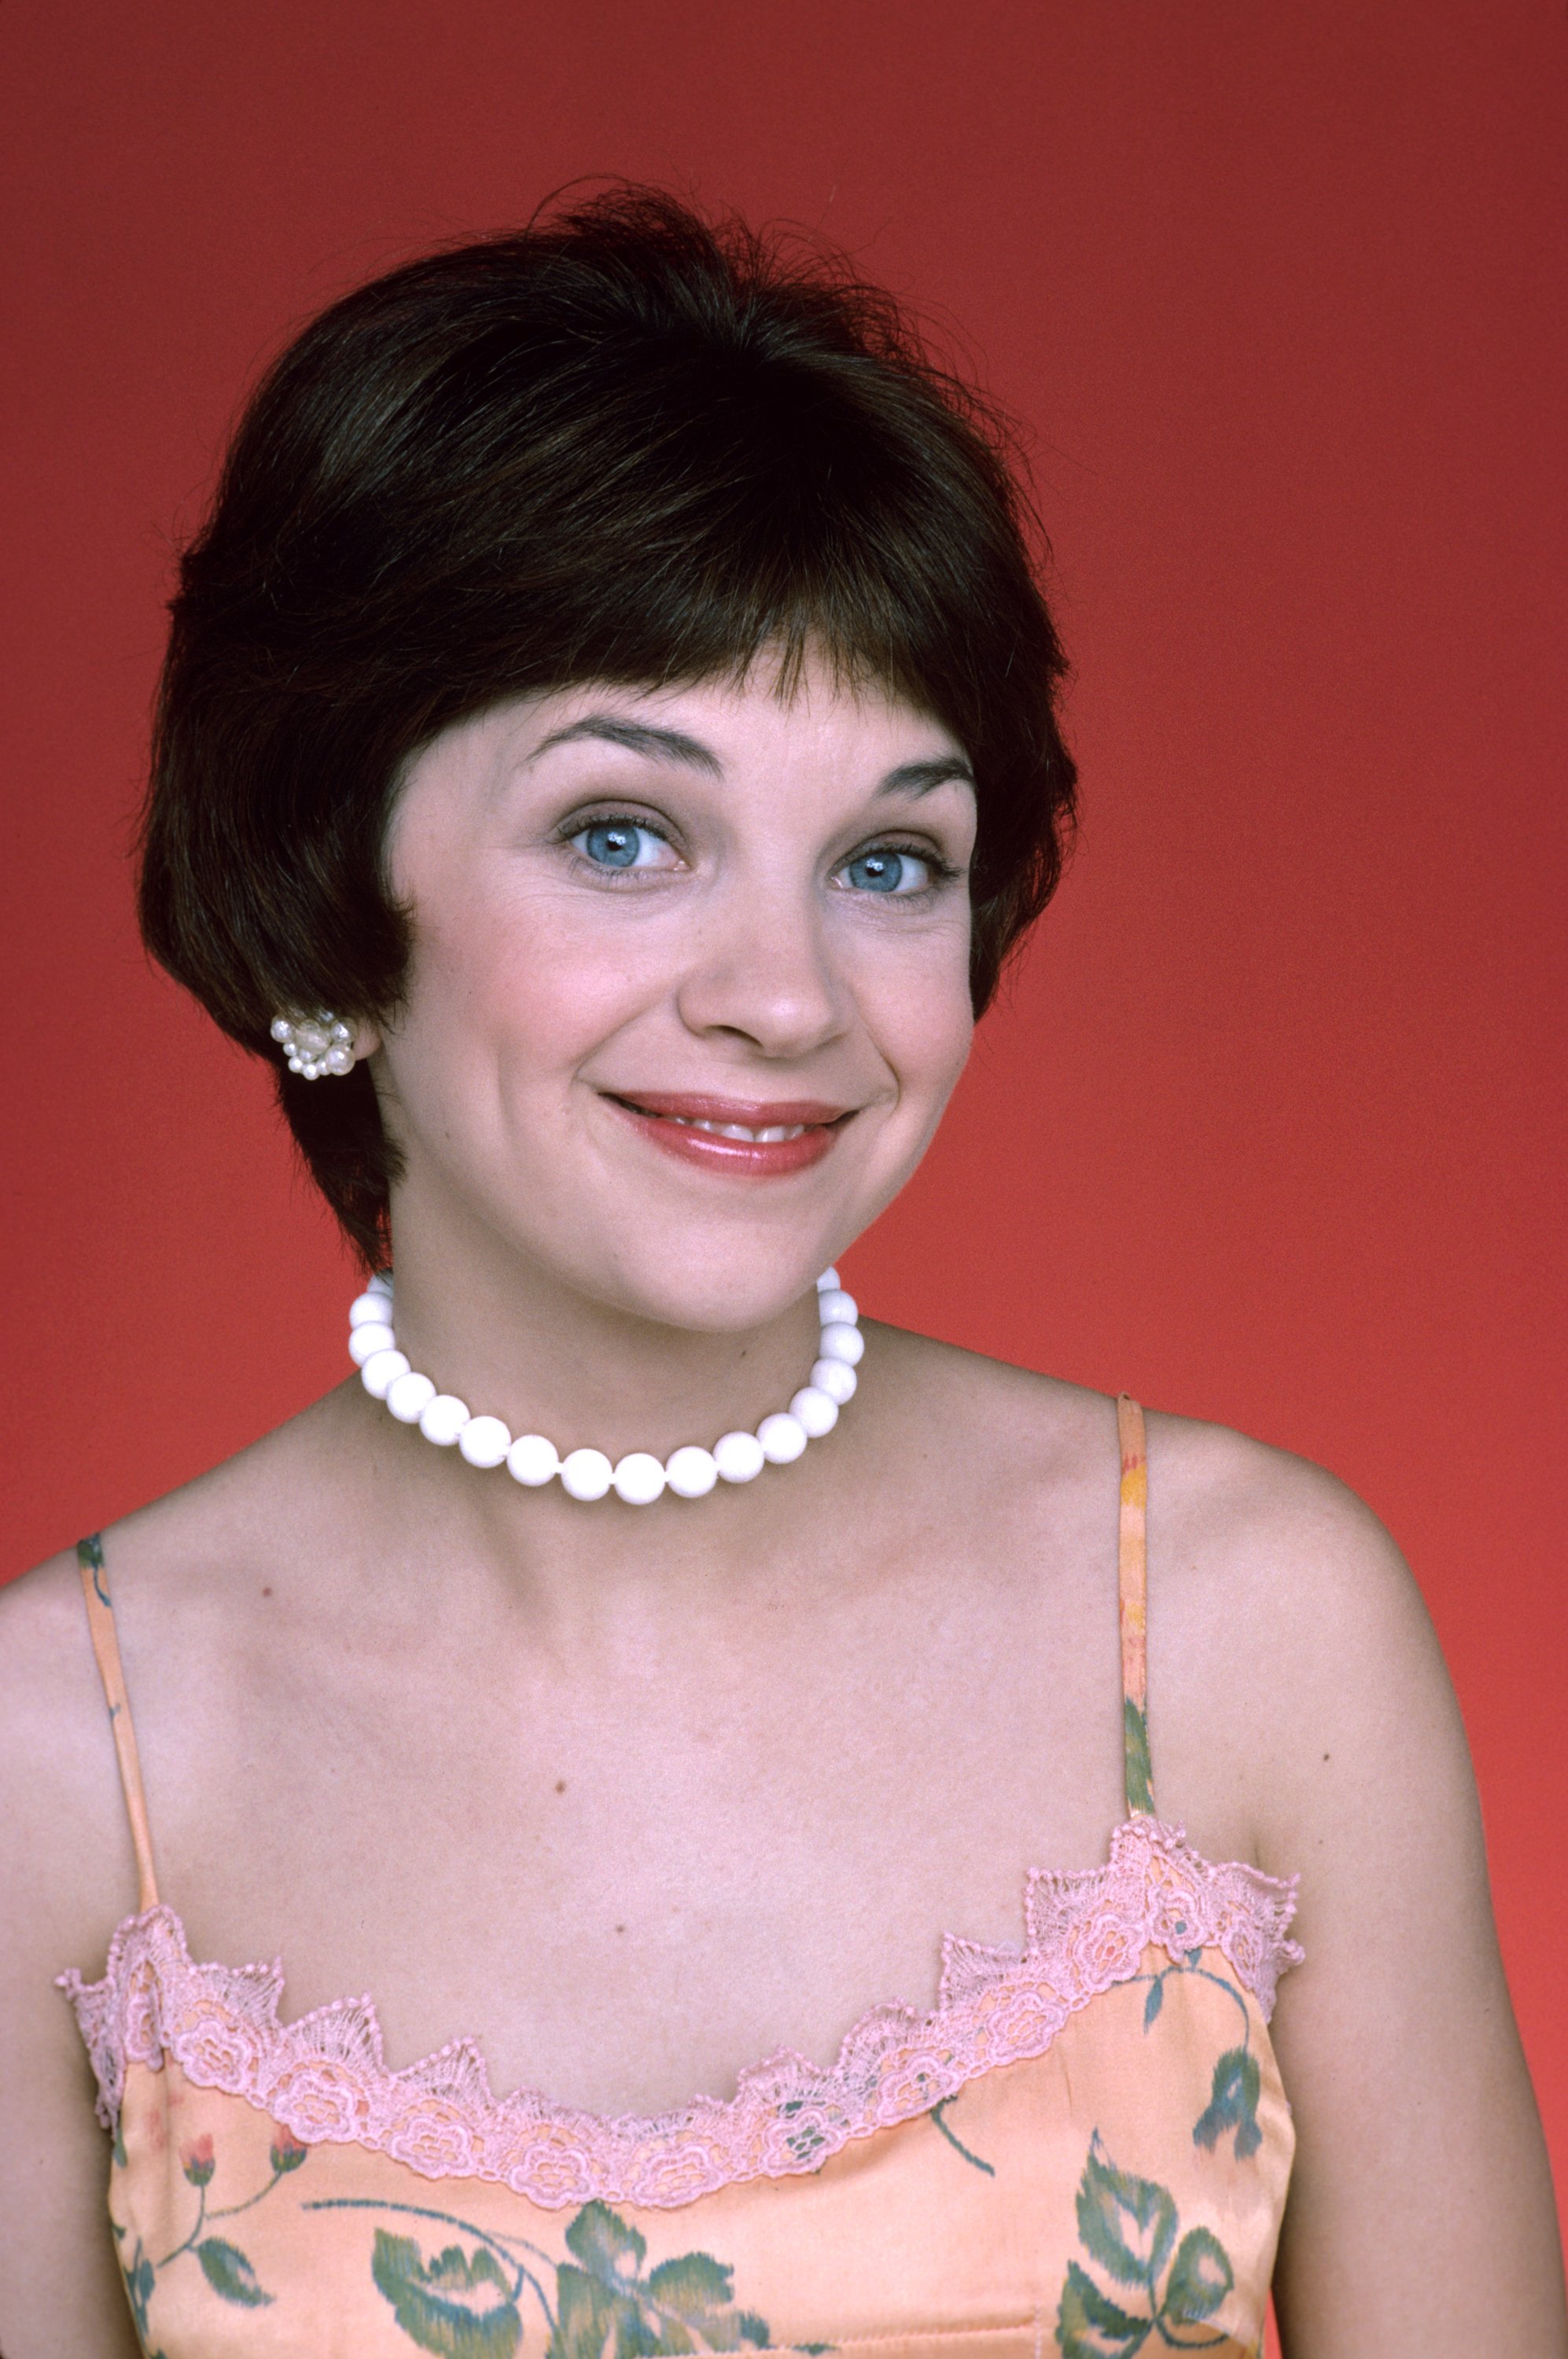 Cindy Williams as Shirley in "Laverne & Shirley," 1976 | Source: Getty Images